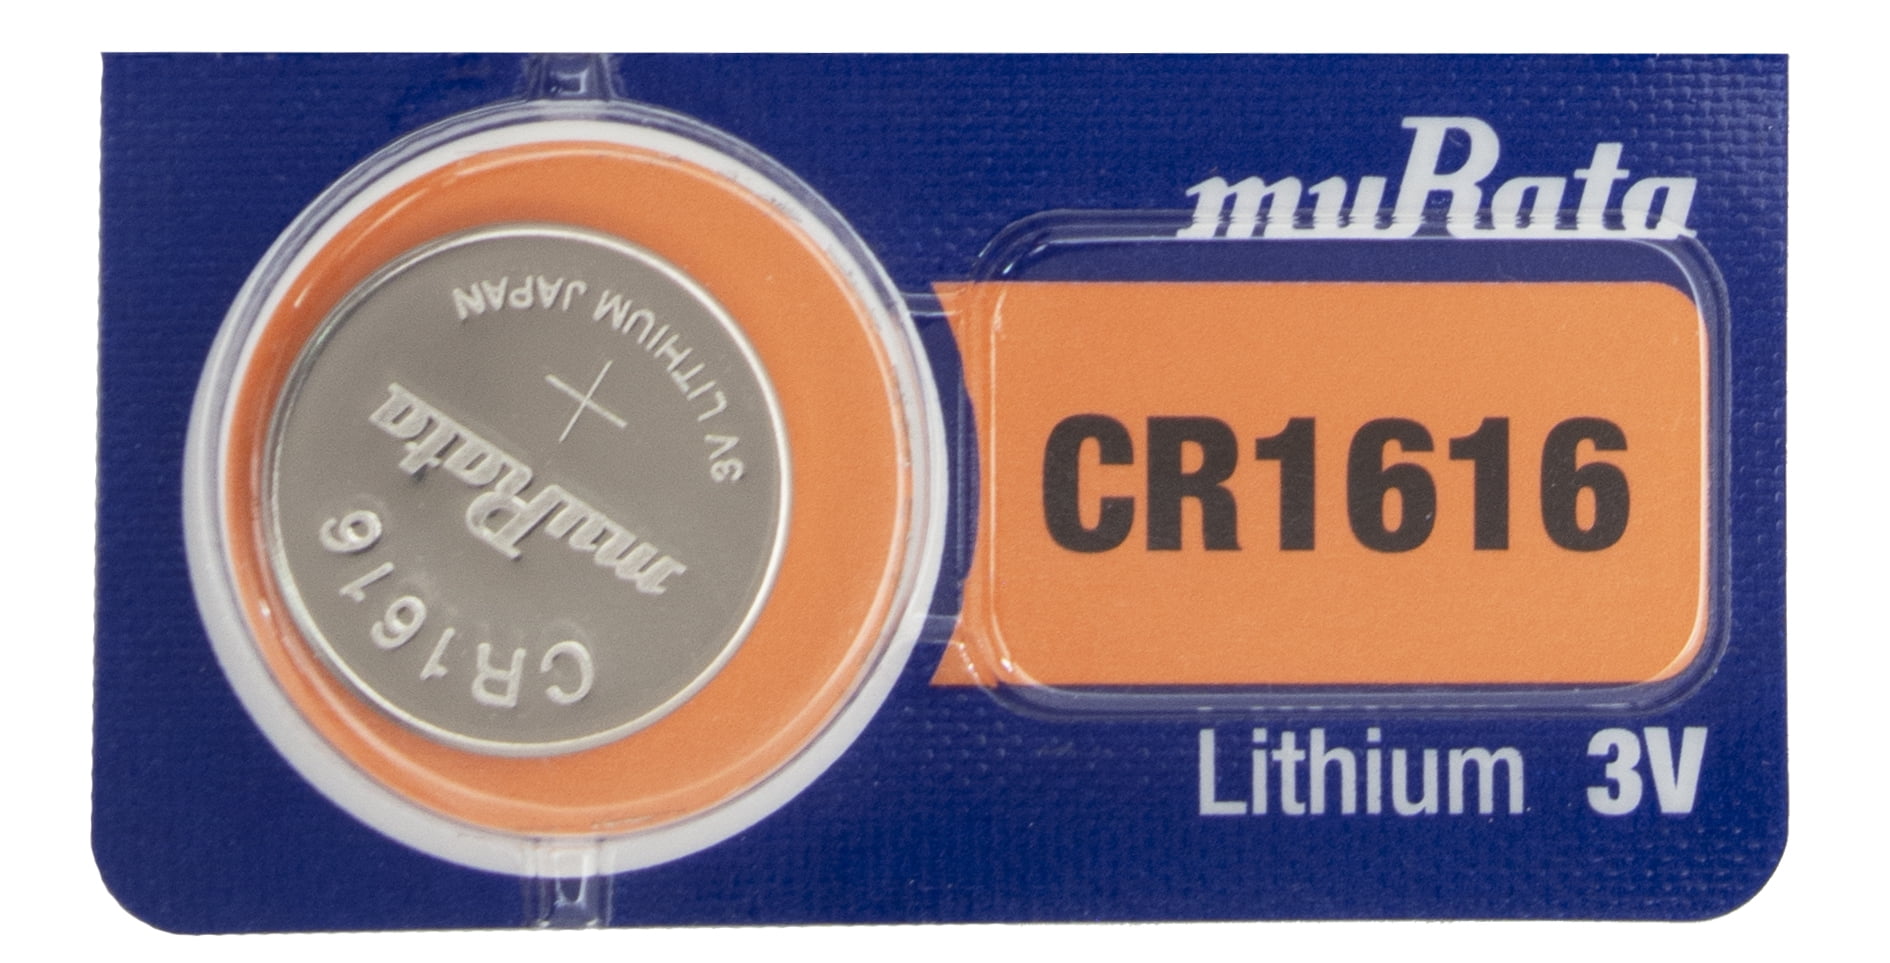 10 great Murata Lithium 3V Batteries Size CR2025 CR 2025- Replaces Sony 